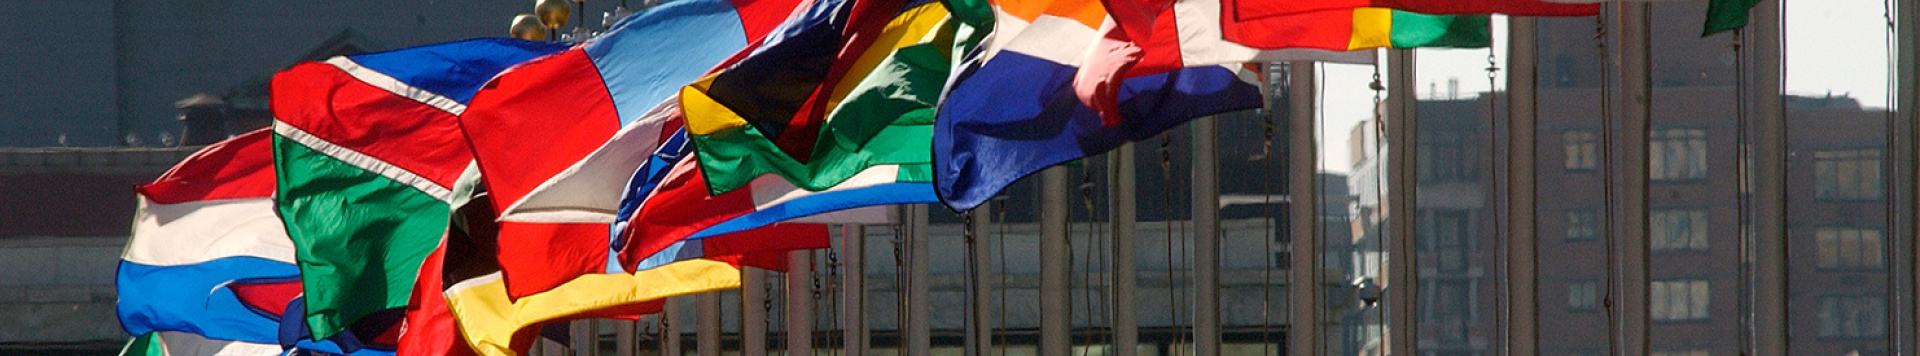 Flags of the UN member states are flapping in the wind.